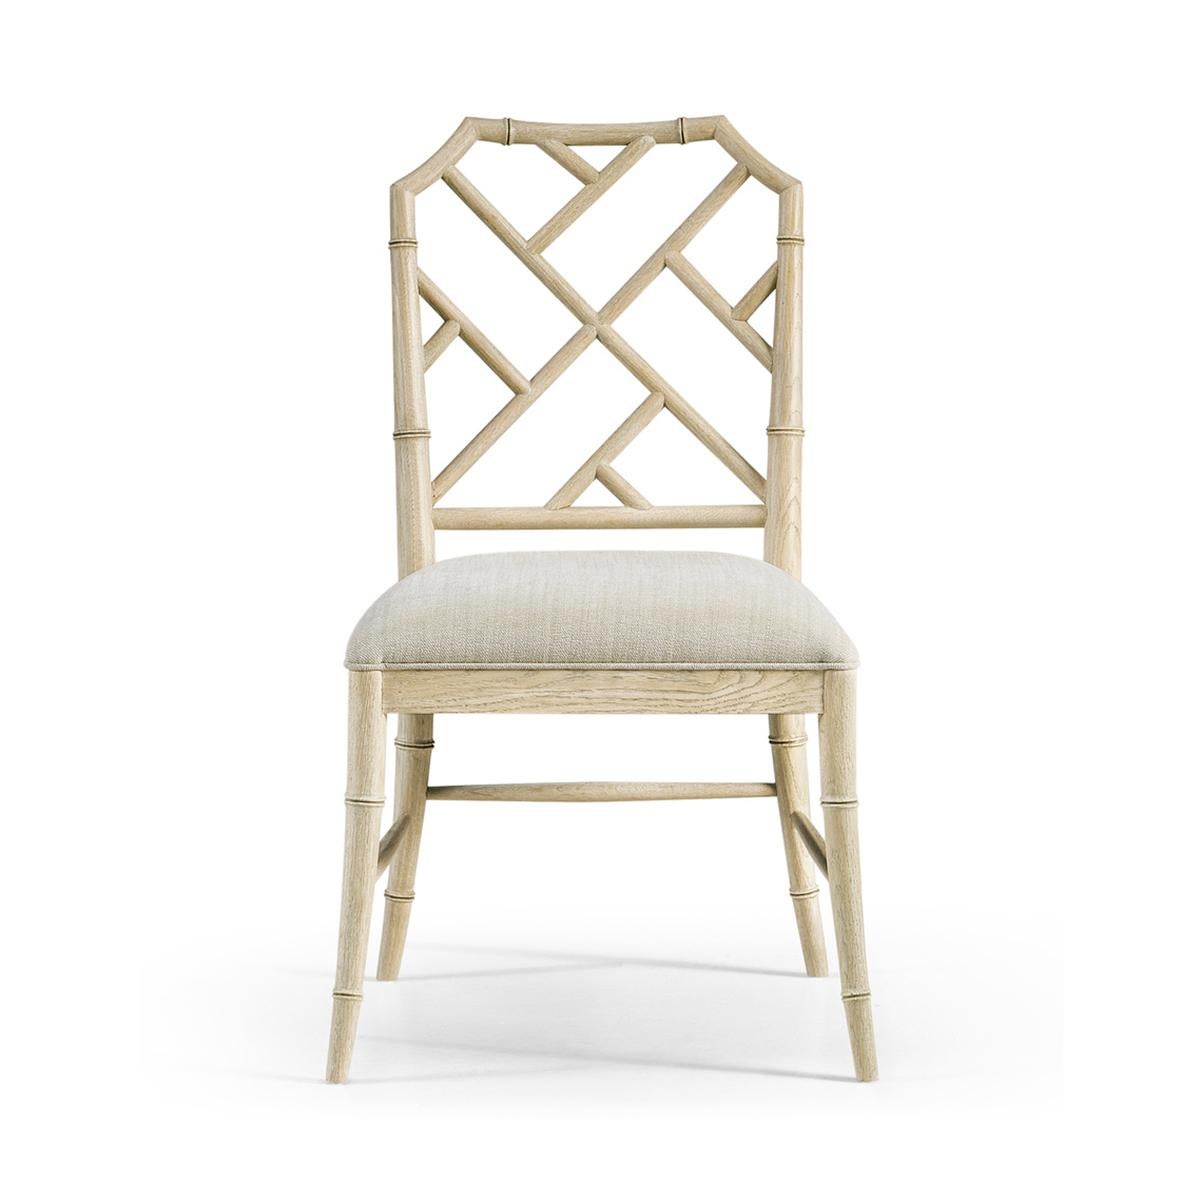 Chippendale Bamboo dining chair, this timeless geometric design lattice back bamboo formed dining side chair in a light oak finish with light distressing. Upholstered in earthy oatmeal performance fabric, the chairs will add comfort and intrigue to